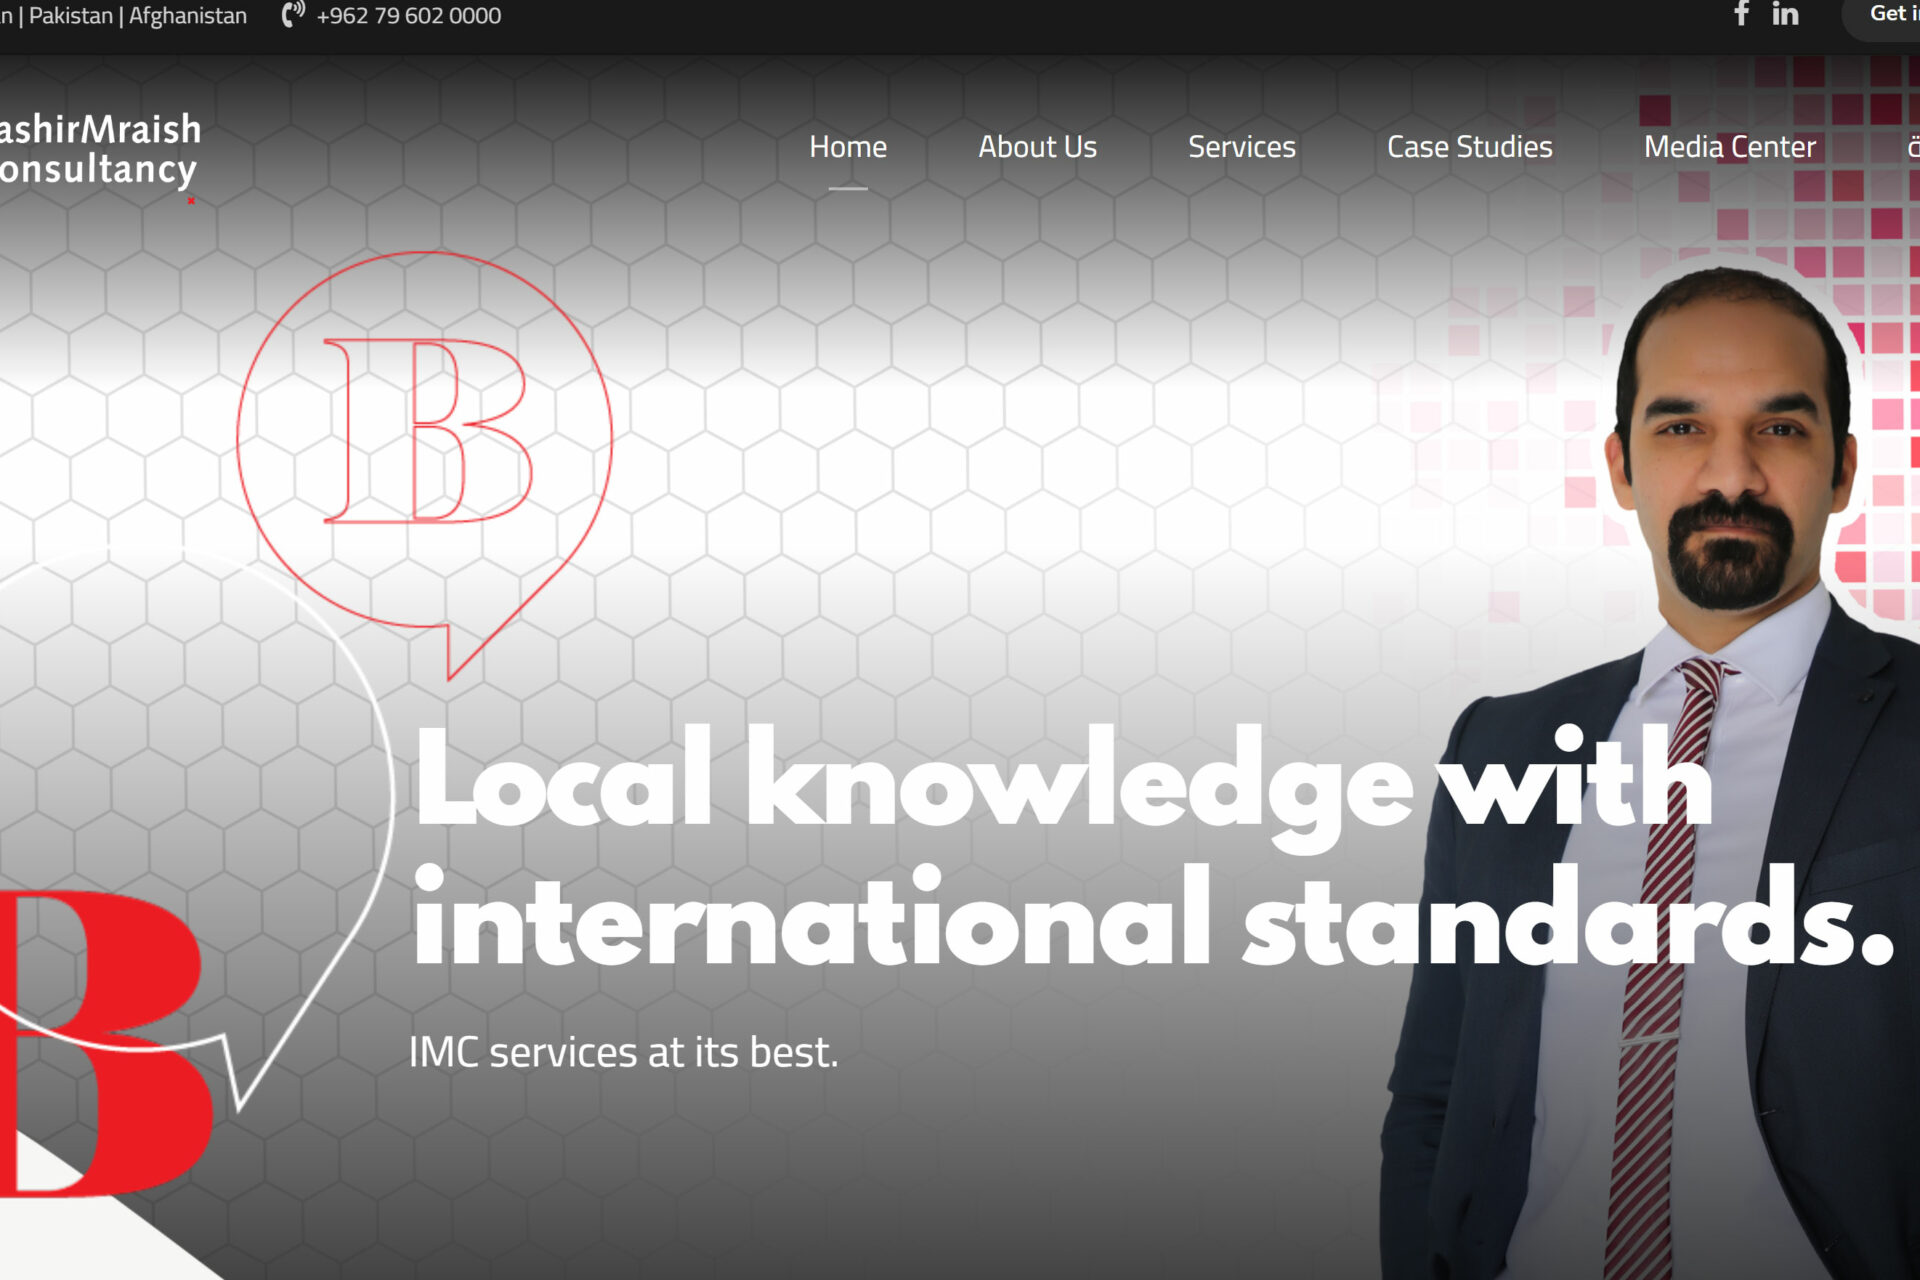 Bashir Mraish Consultancy Launches Its New Website